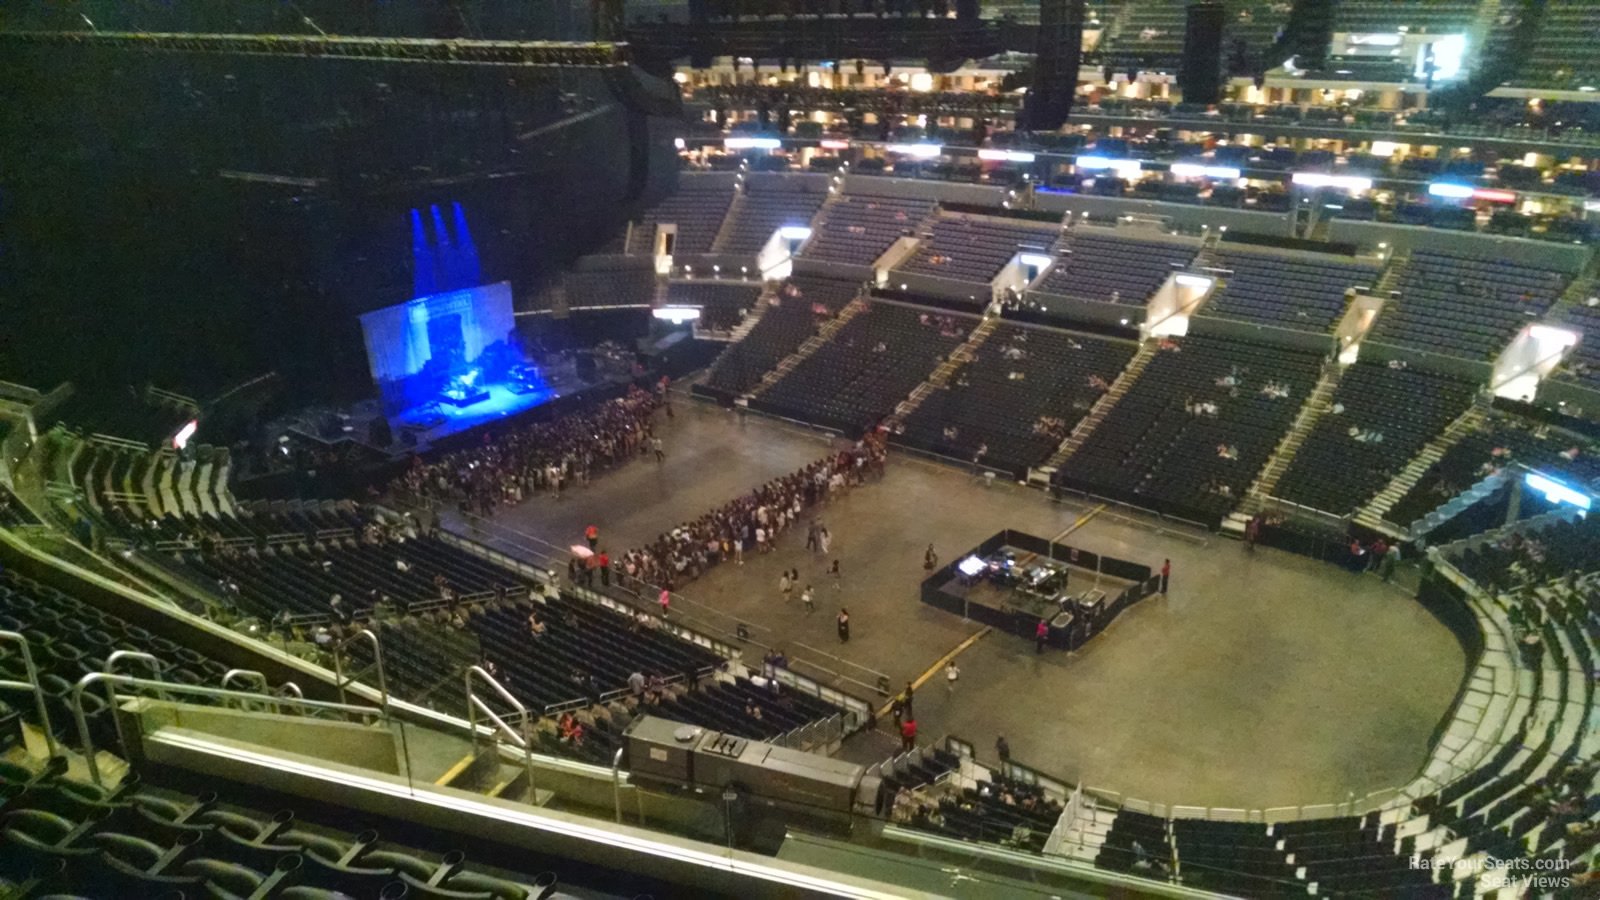 section 315, row 12 seat view  for concert - crypto.com arena